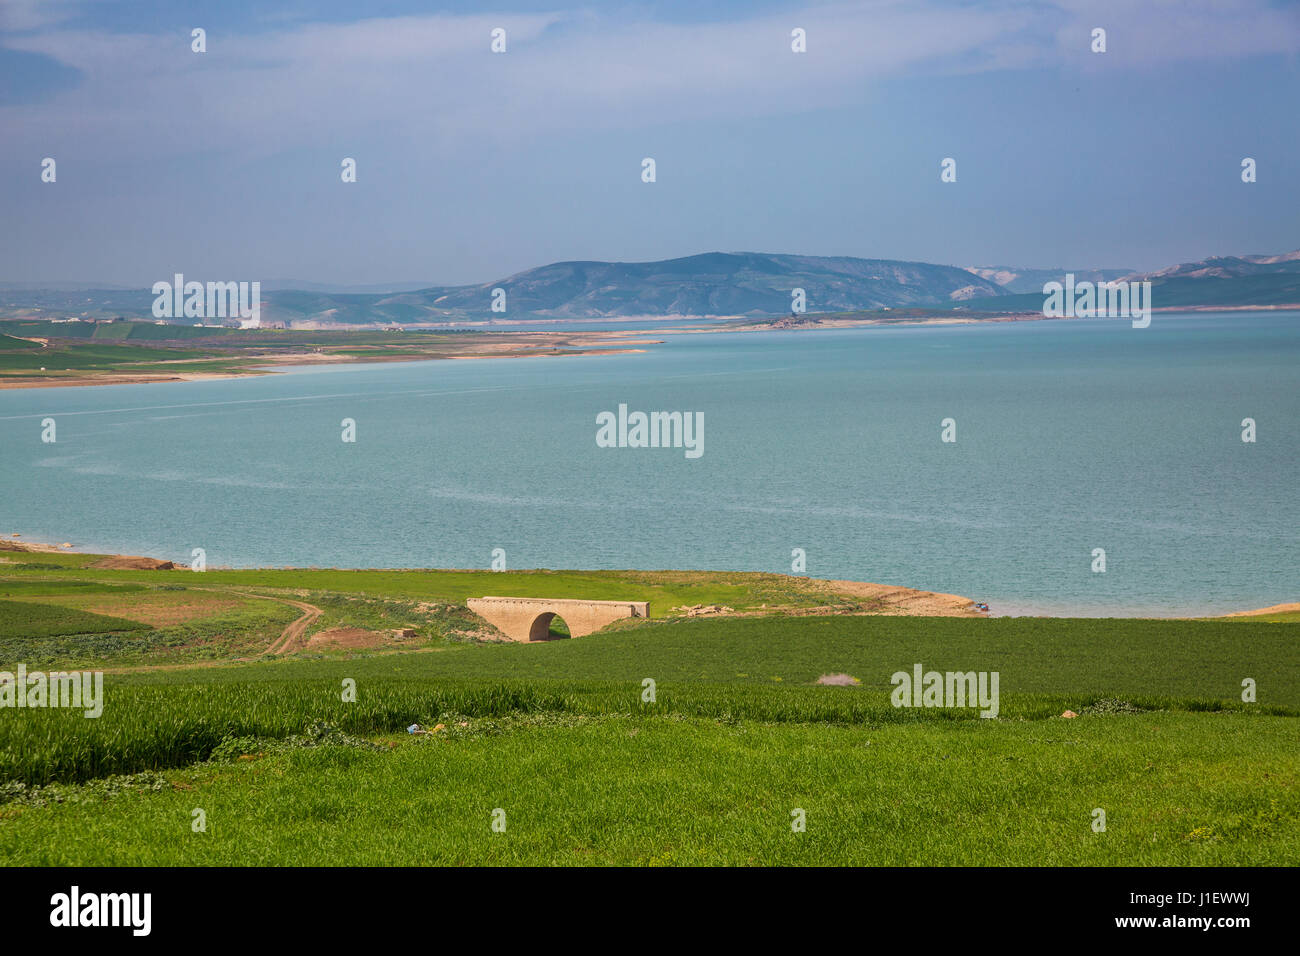 Spring landscape around the water reservoir Barrage Idriss, Morocco Stock Photo